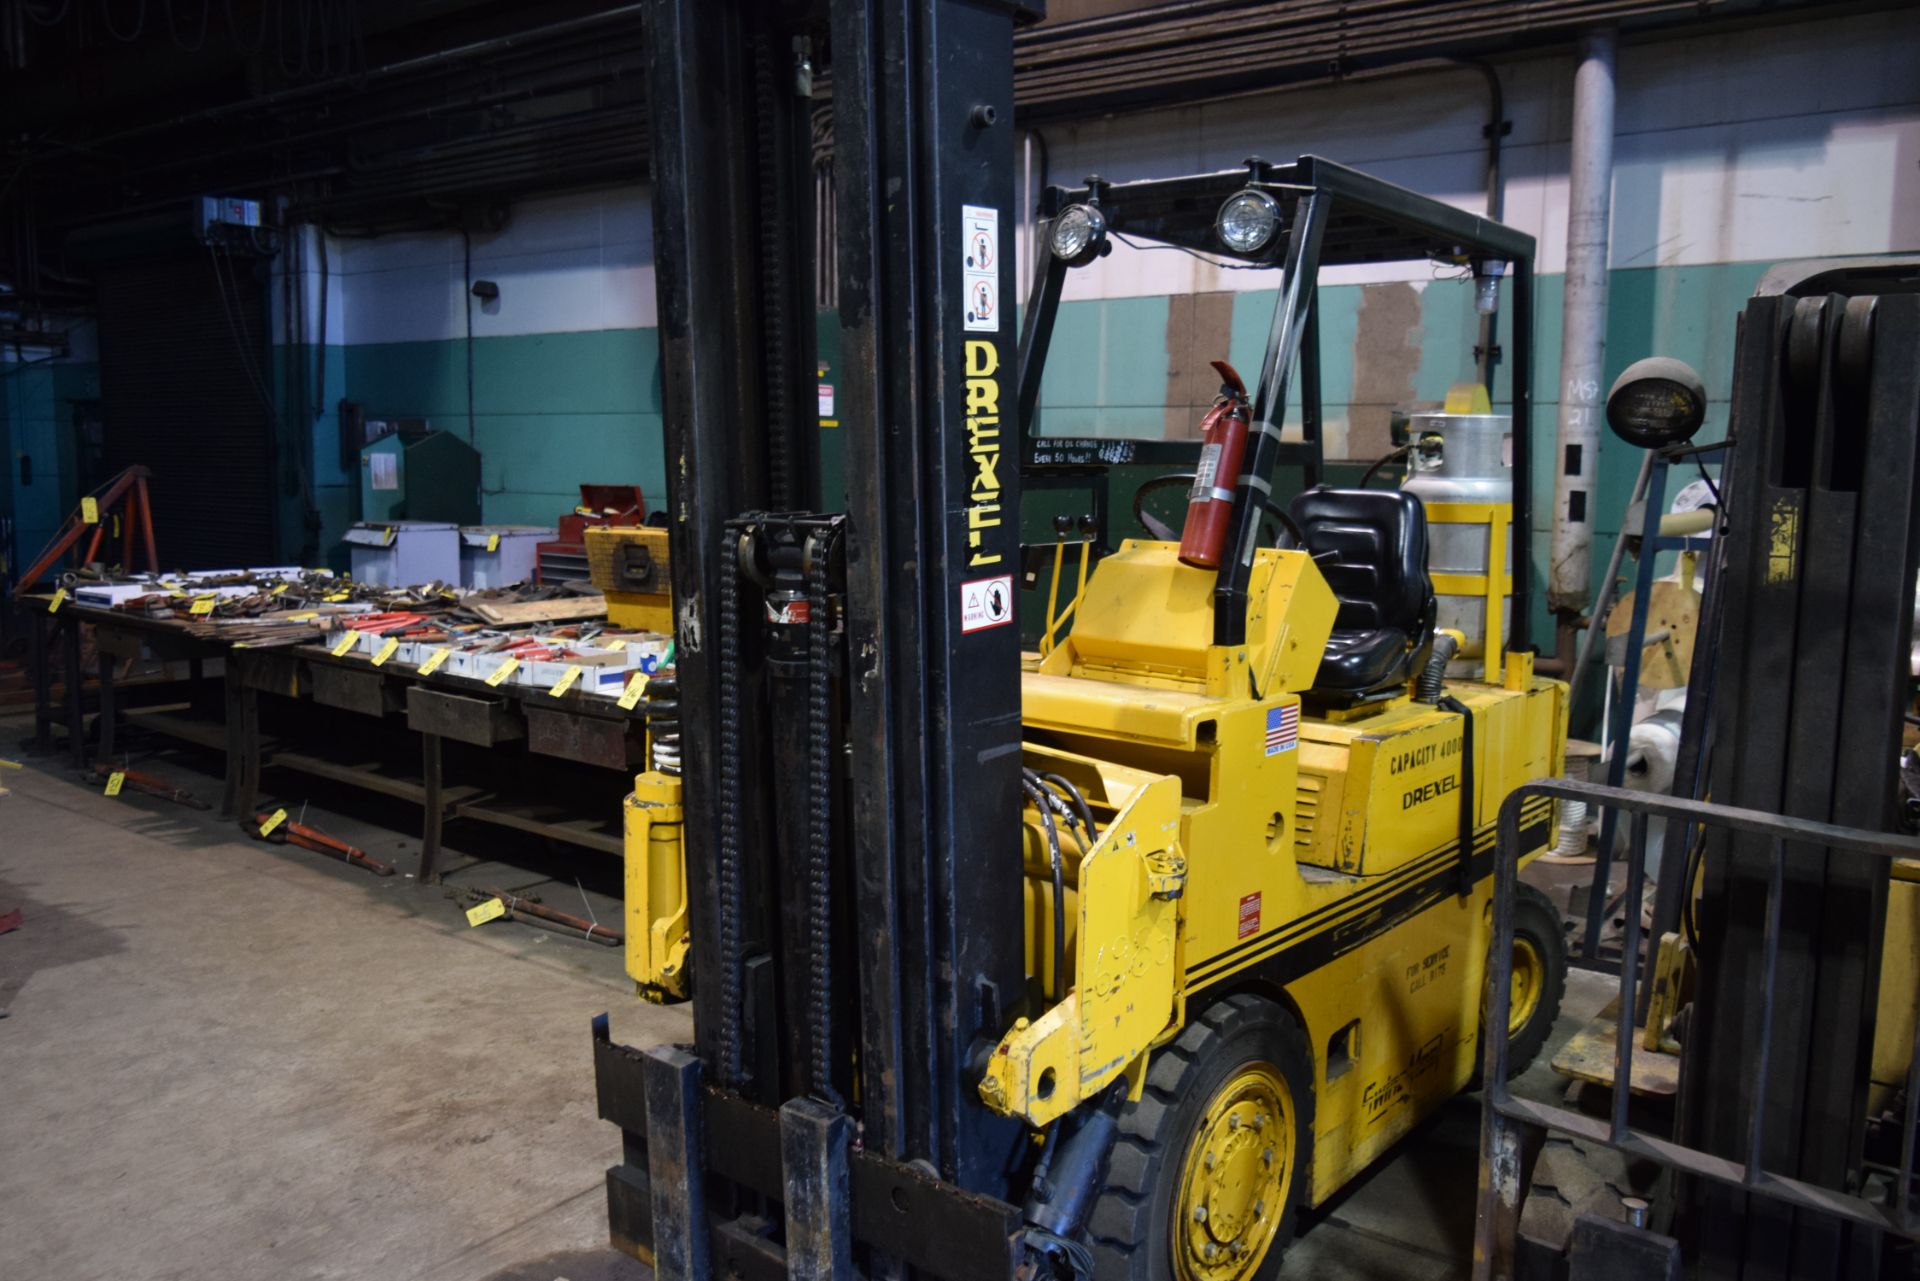 DREXEL MODEL R40Sl-l LP POWERED NARROW AISLE SWING MAST FORK LIFT TRUCK, S/N 23008-4-25, RATED AT - Image 3 of 4